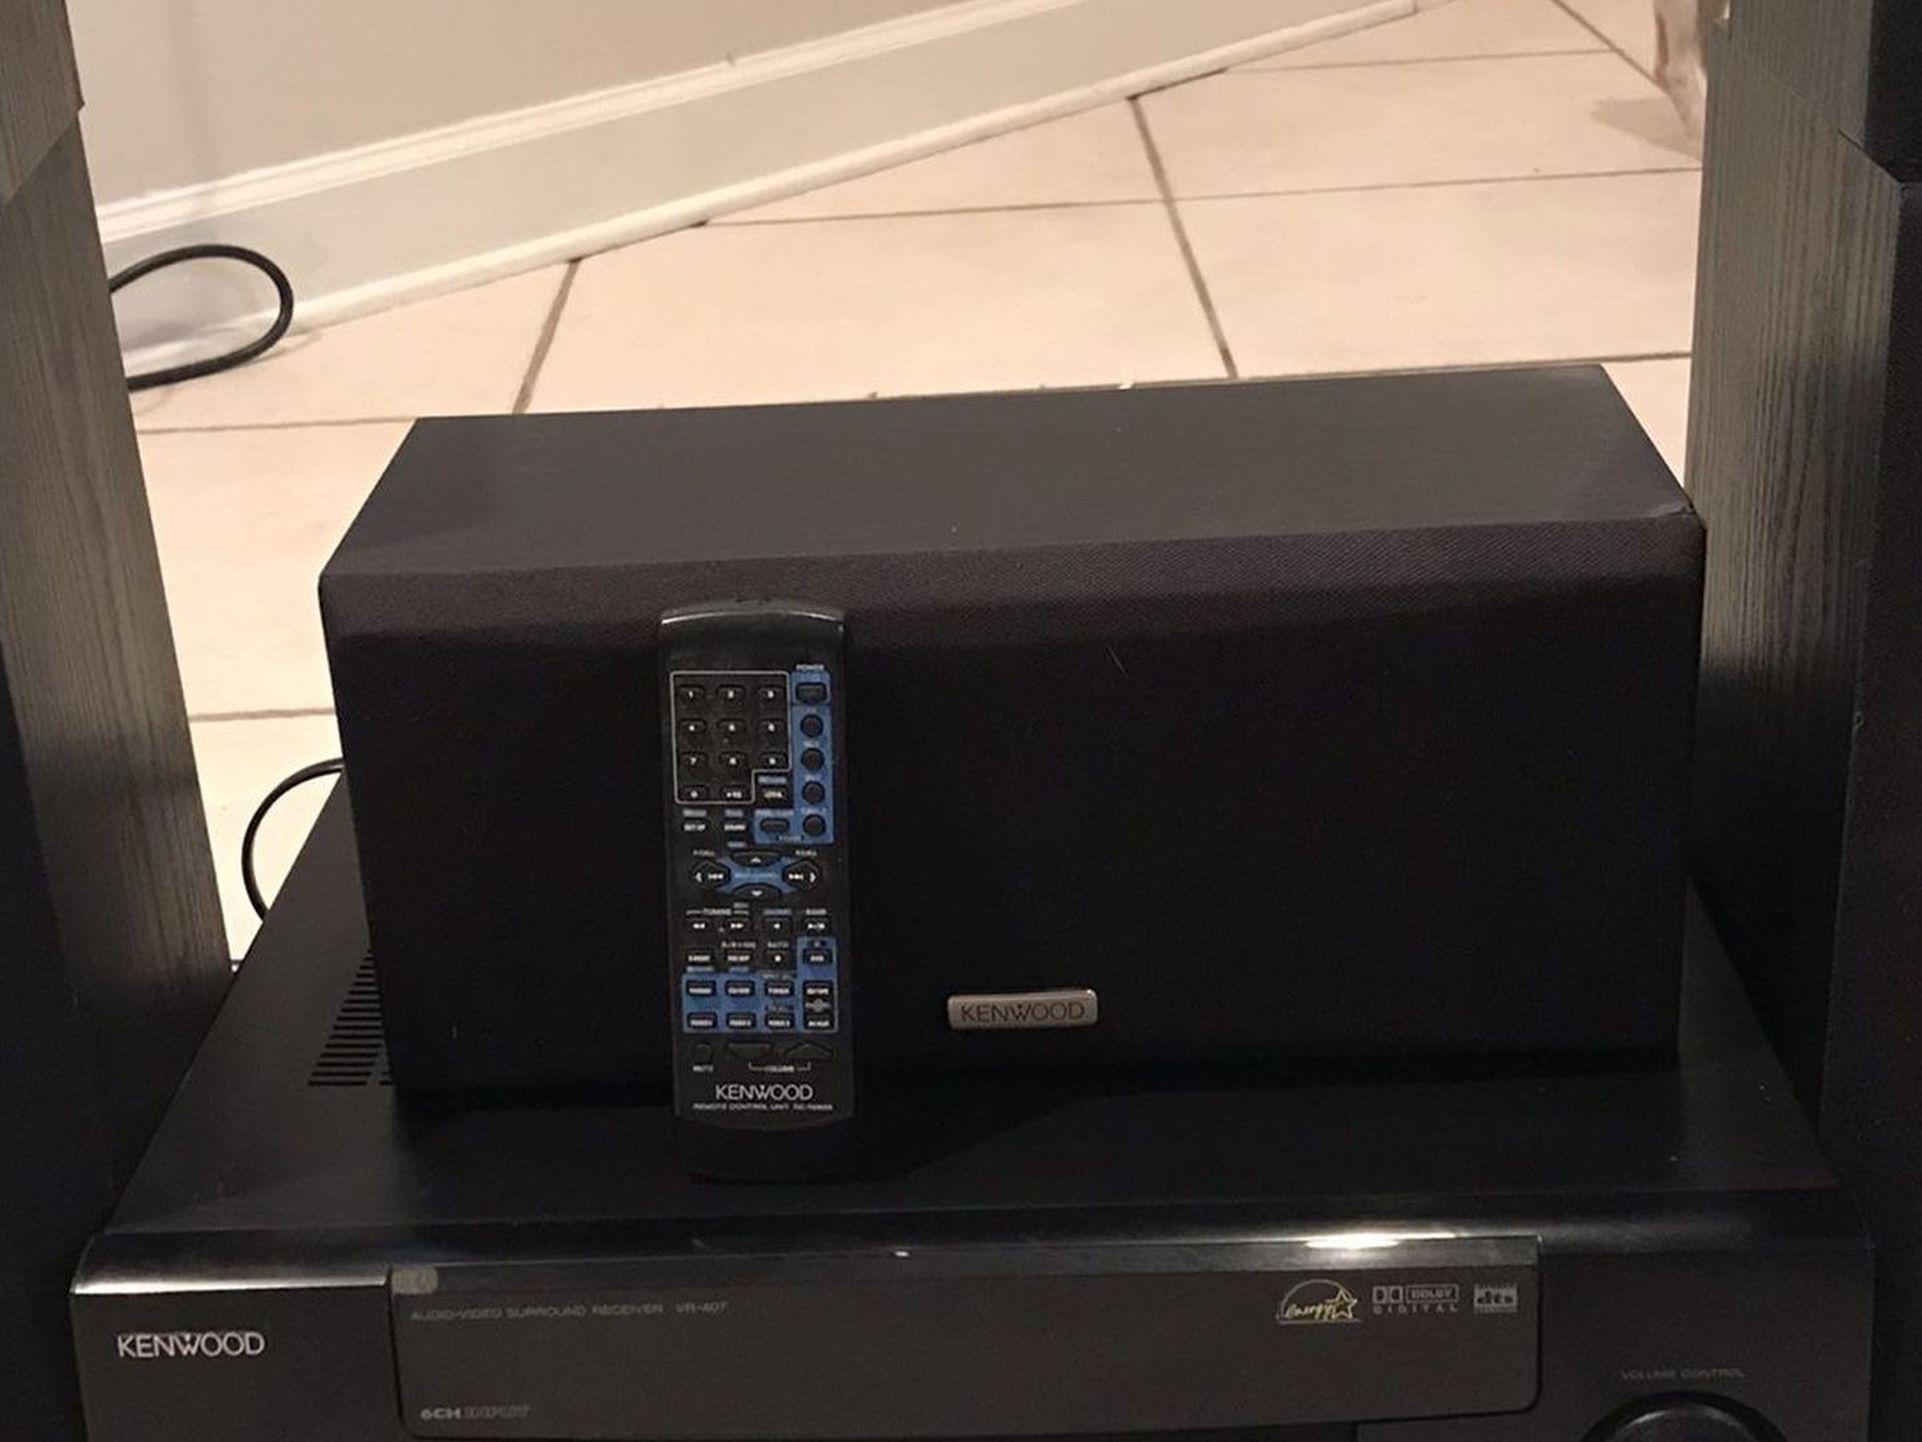 Kenwood Surround Receiver Compelete With All Speakers And Remote Control